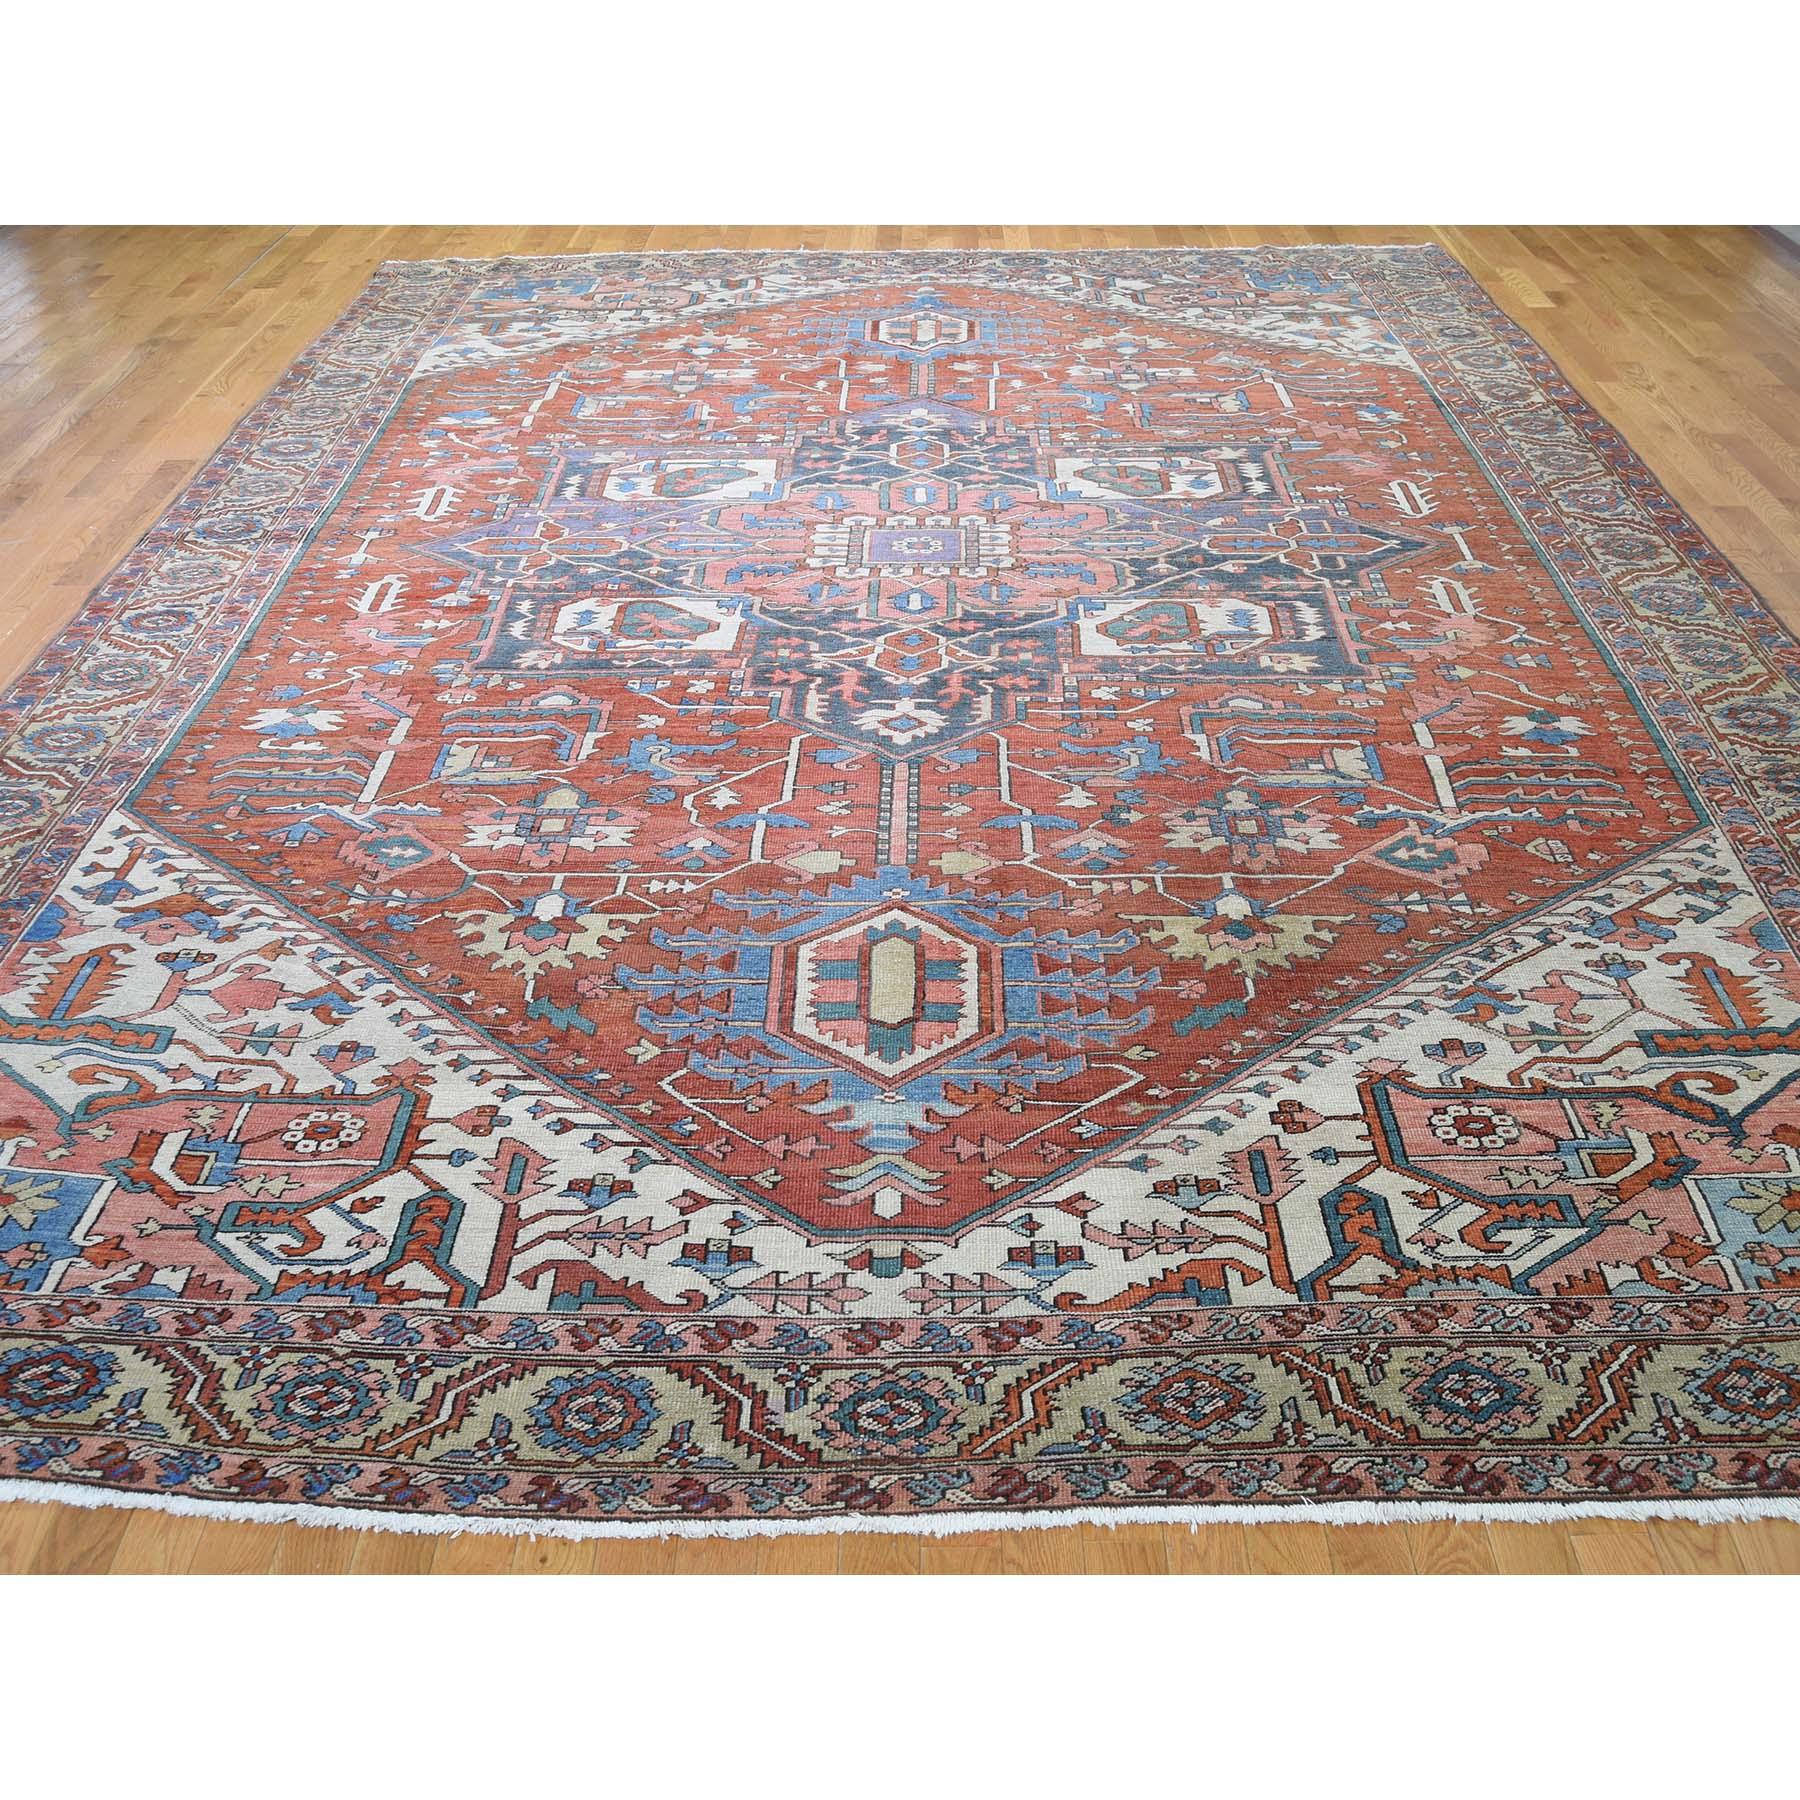 Other Persian Serapi Heriz Excellent Condition Hand Knotted Oversize Oriental Rug